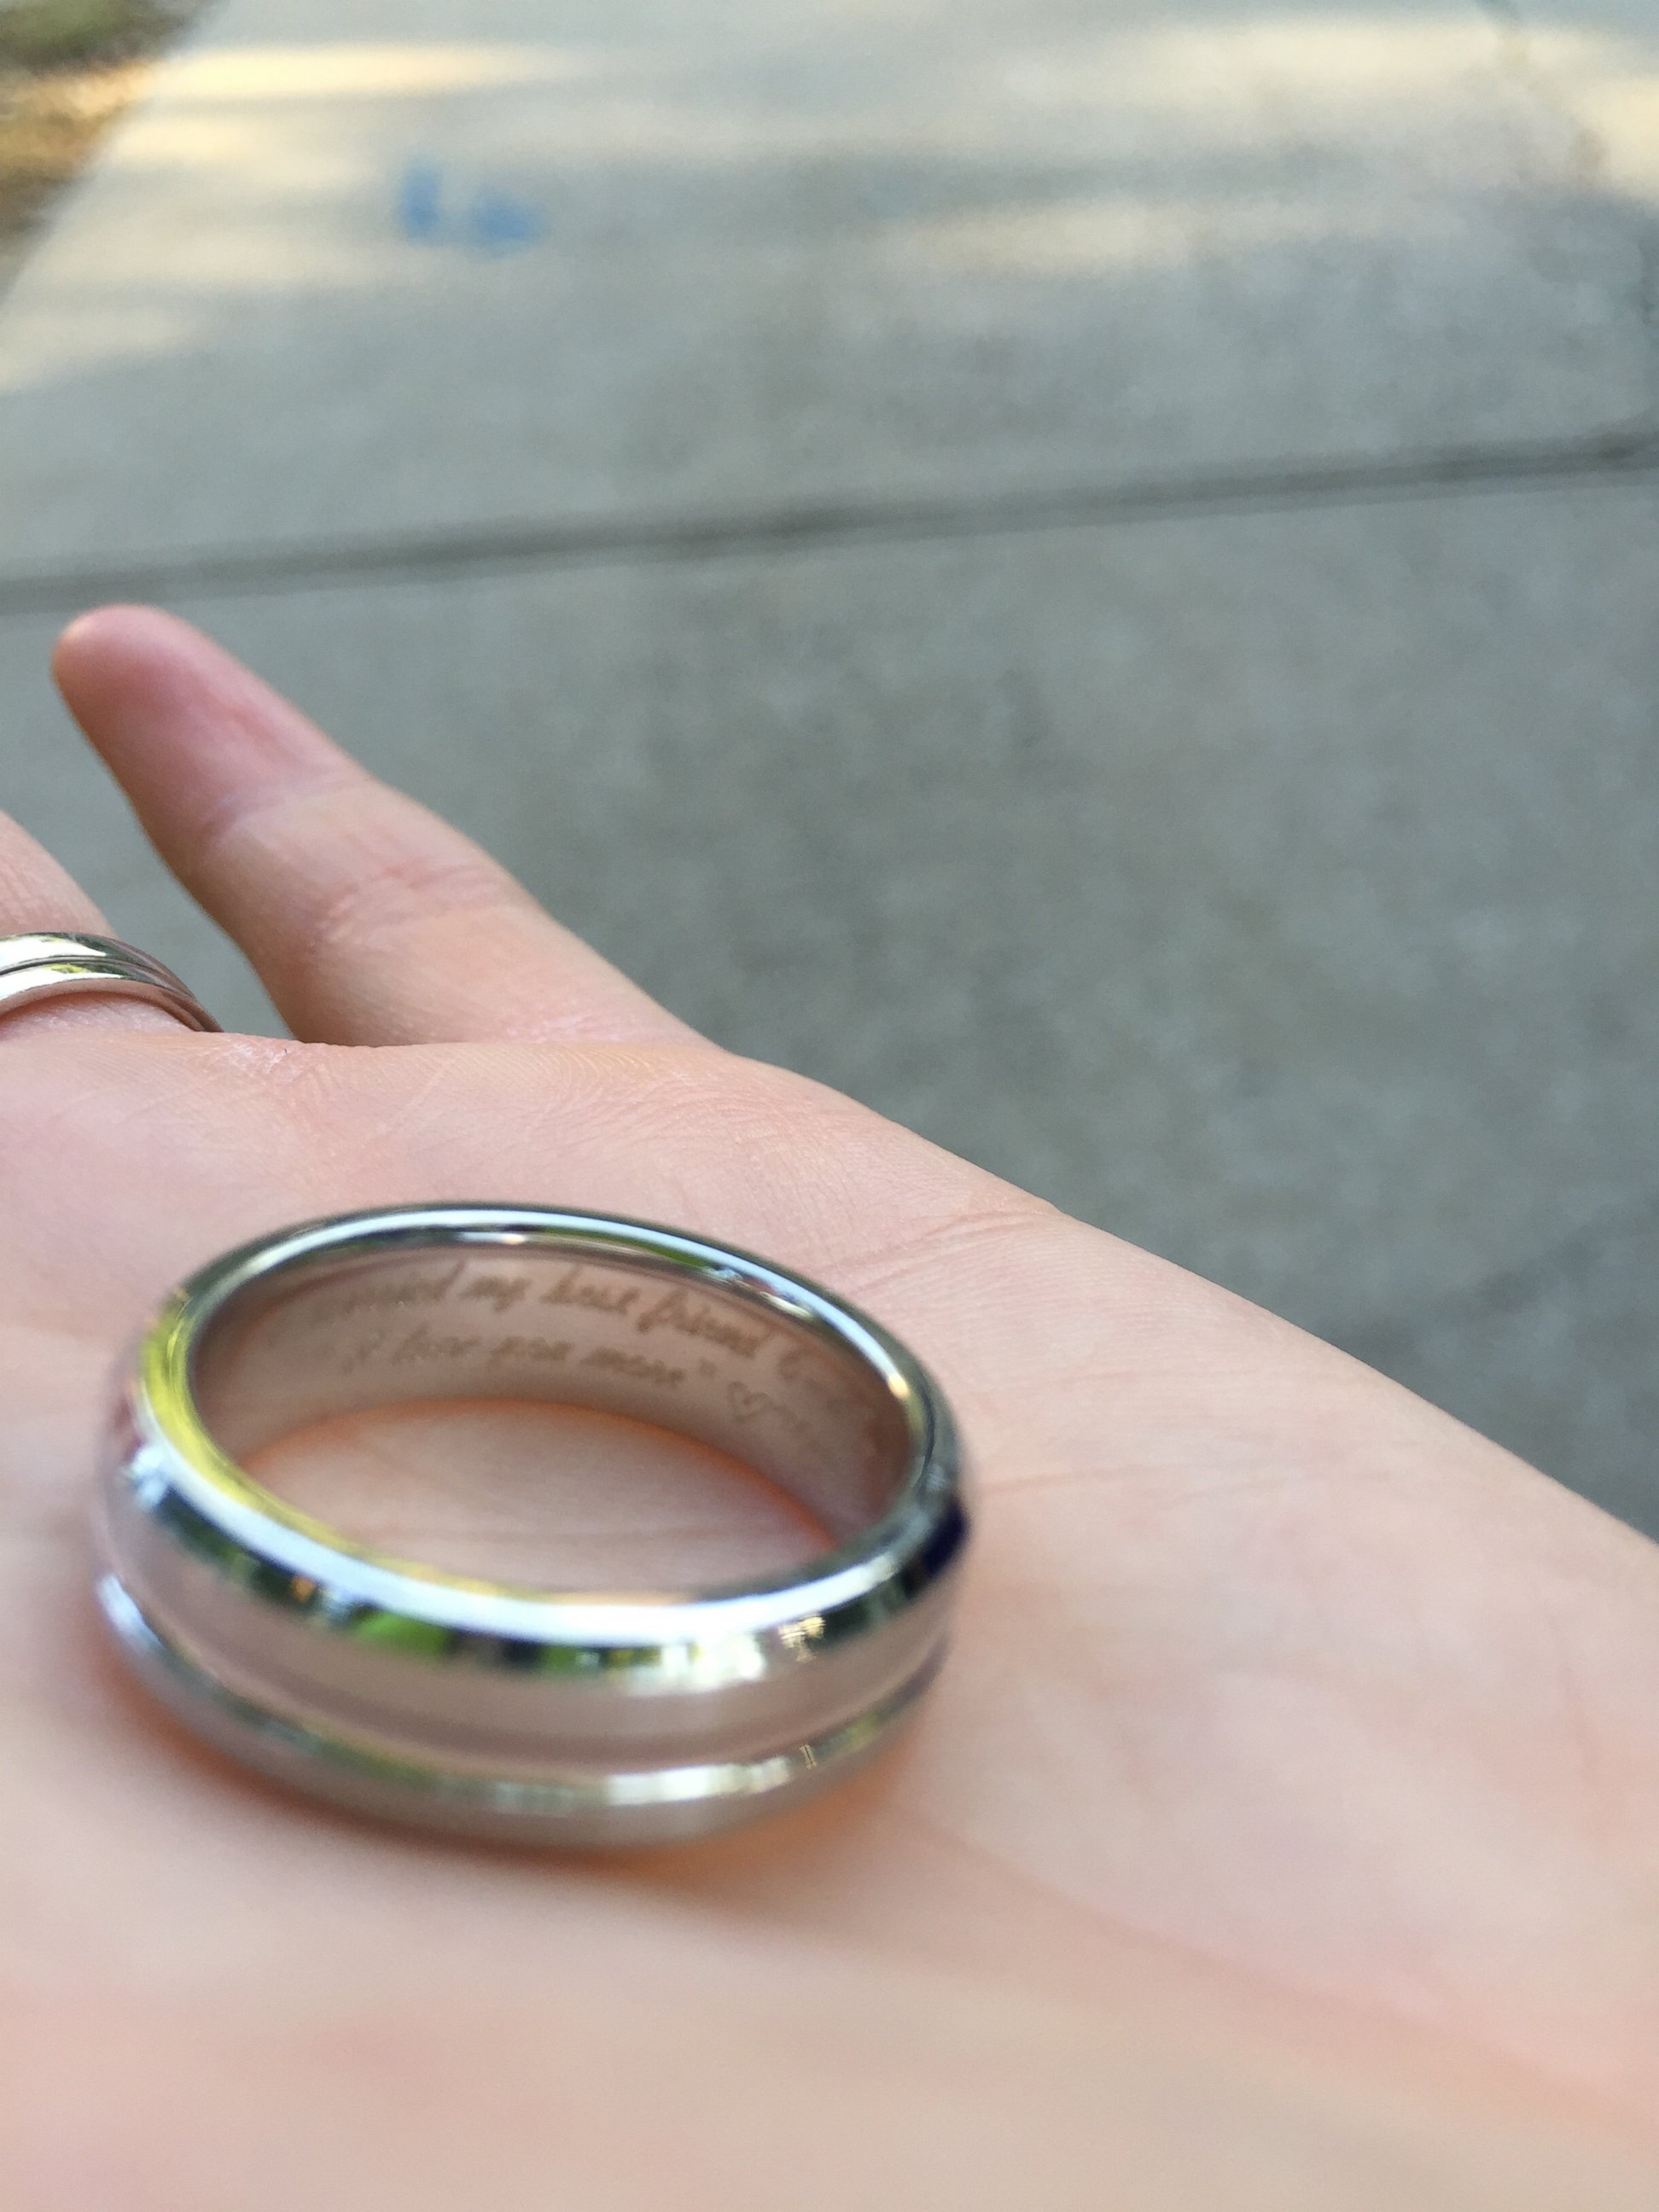 PHOTO: Couple’s Lost Wedding Ring Returned From Hawaii Thanks to Coordinates Inscribed on Band